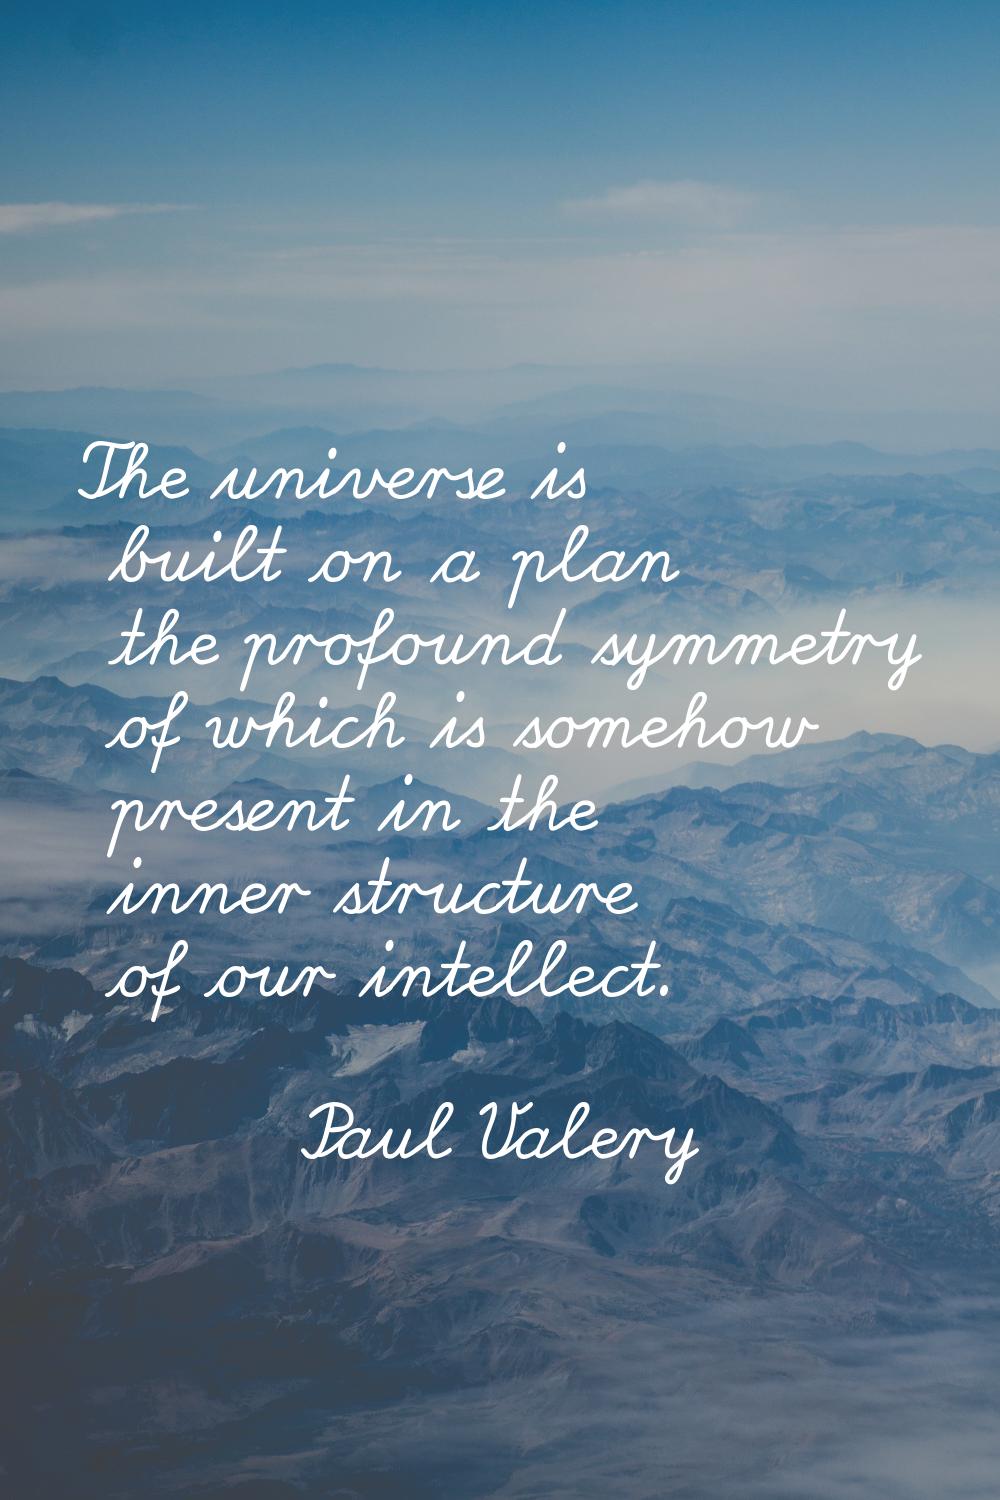 The universe is built on a plan the profound symmetry of which is somehow present in the inner stru